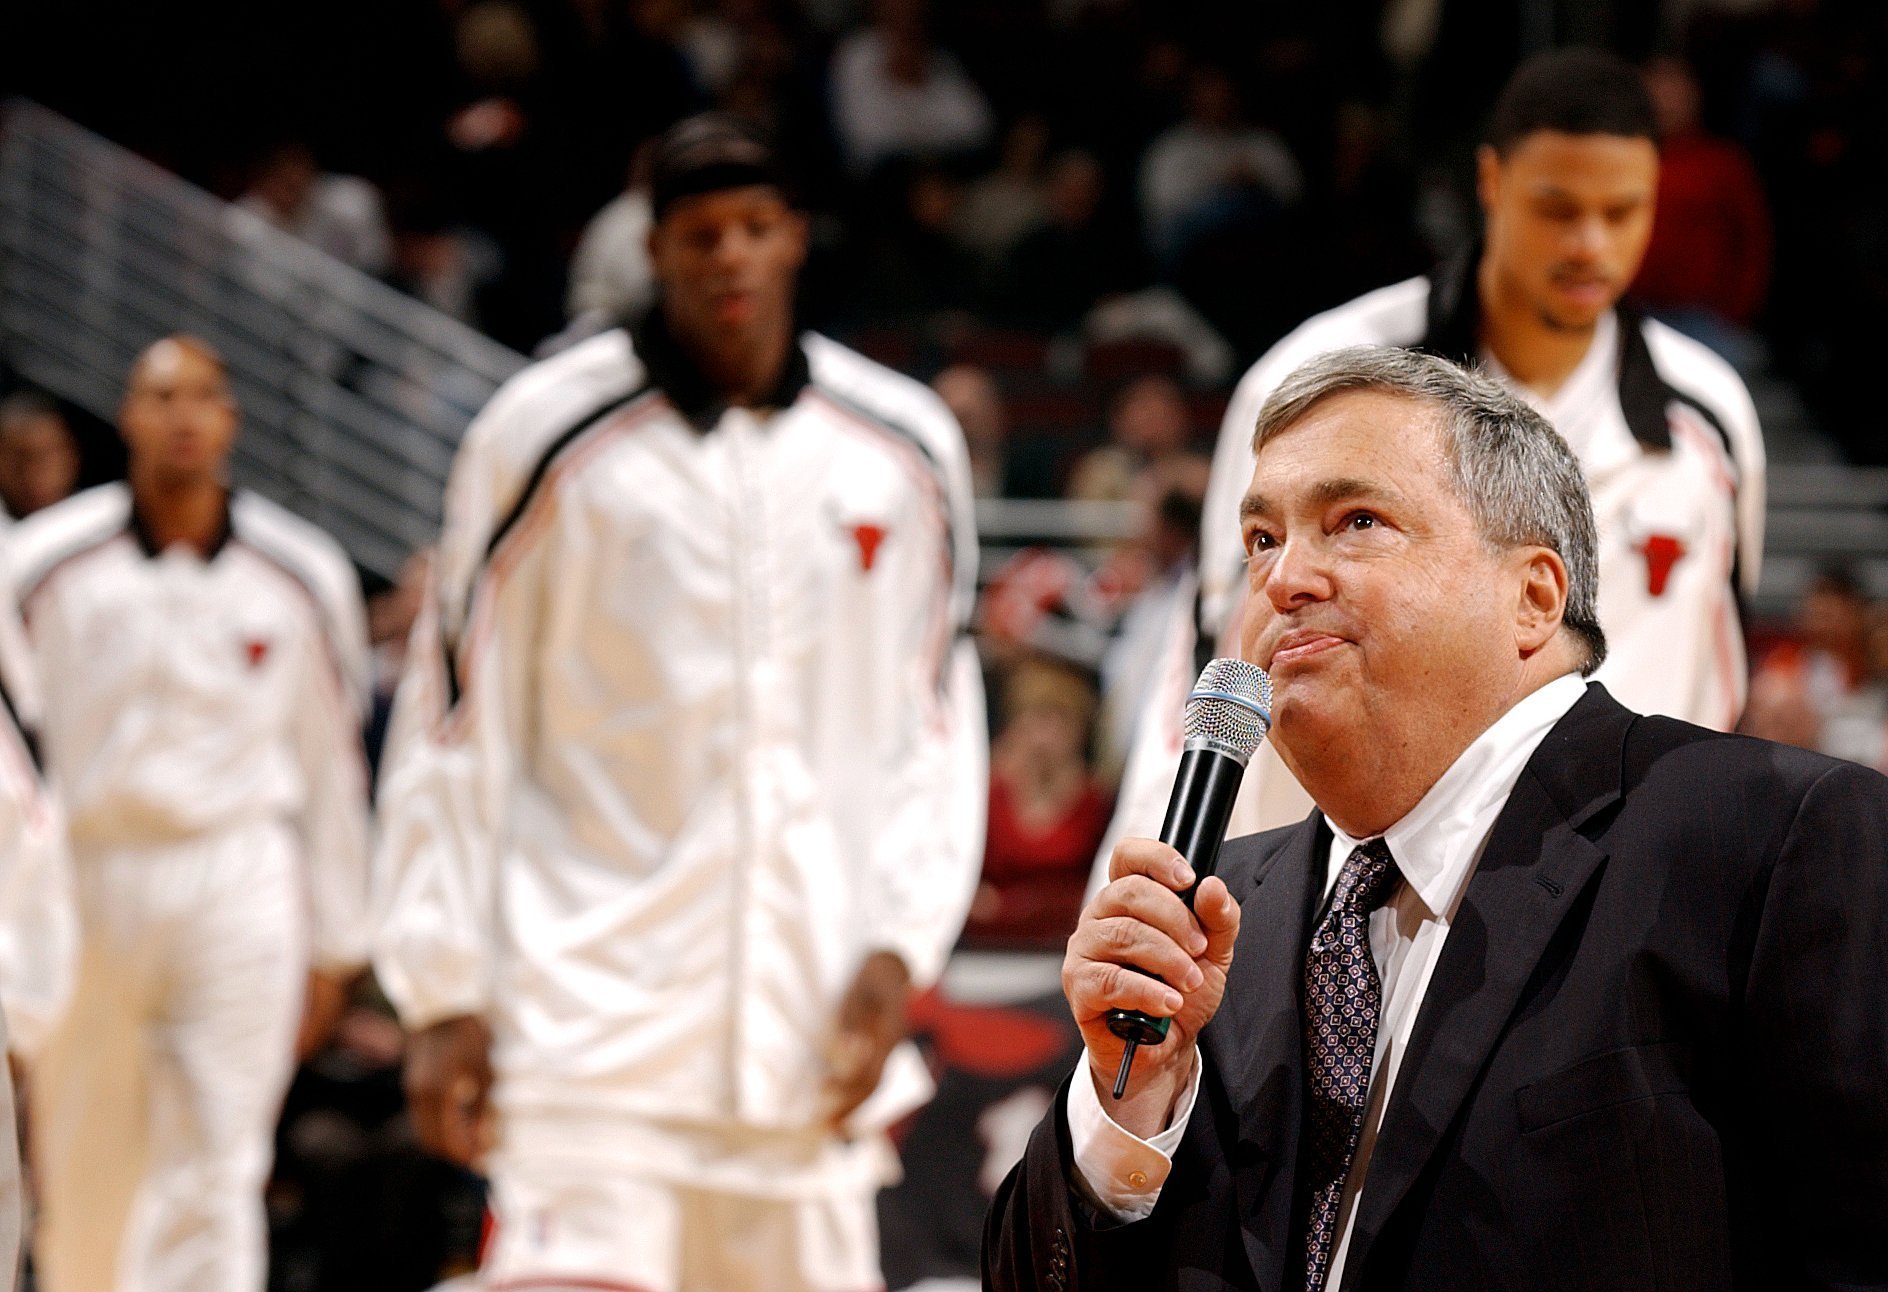 Last Dance" Reveals How Hated Jerry Krause Was In Bulls Locker Room